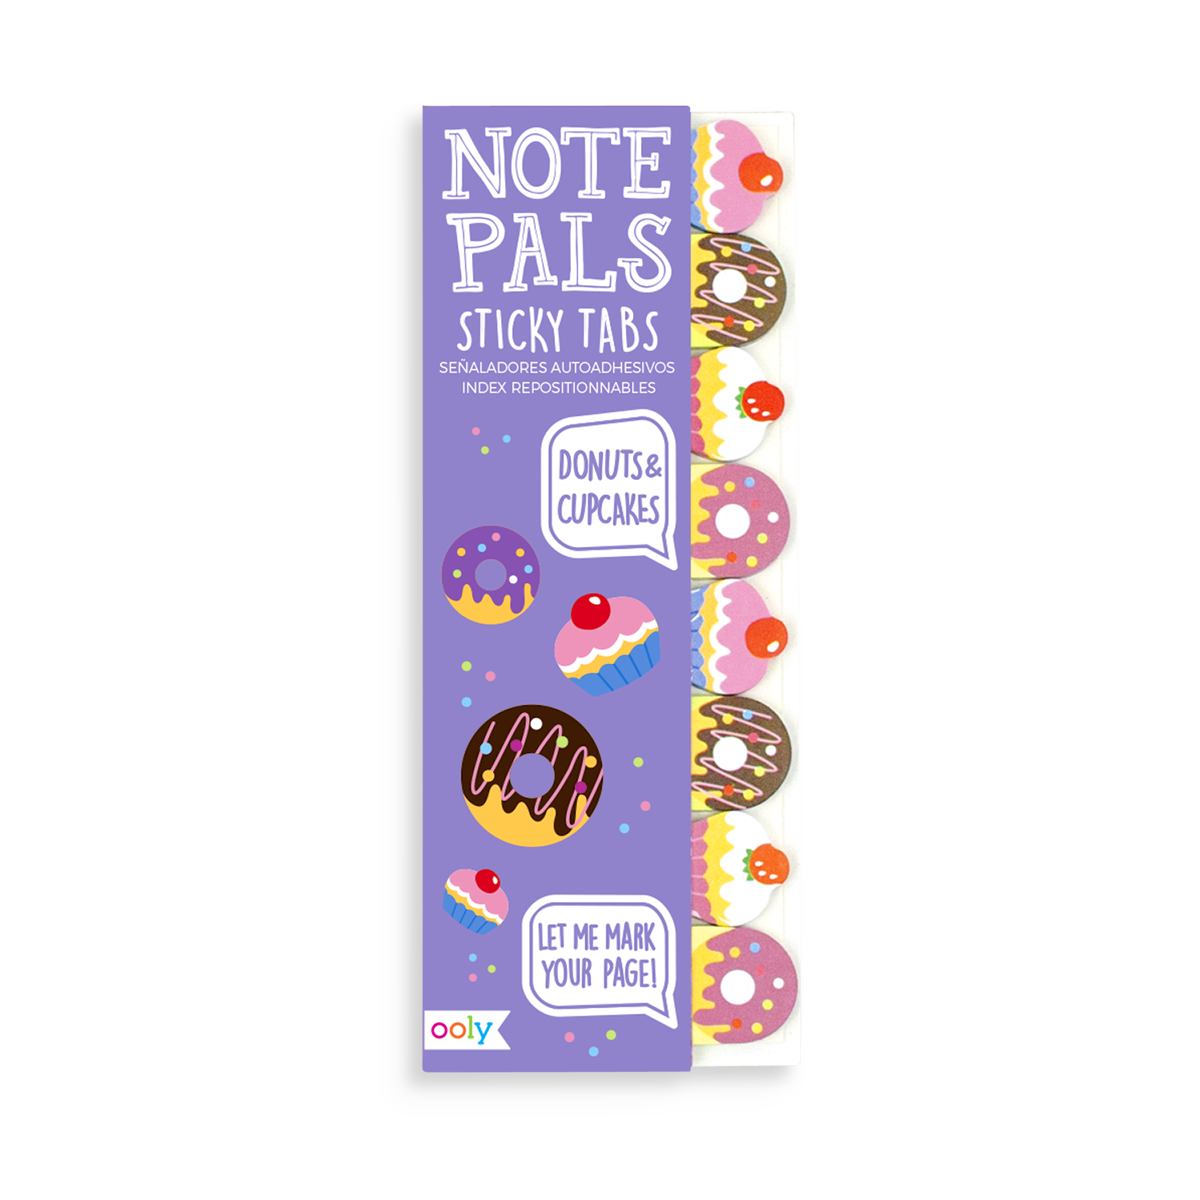 Note Pals Sticky Tabs with frosted donut designs